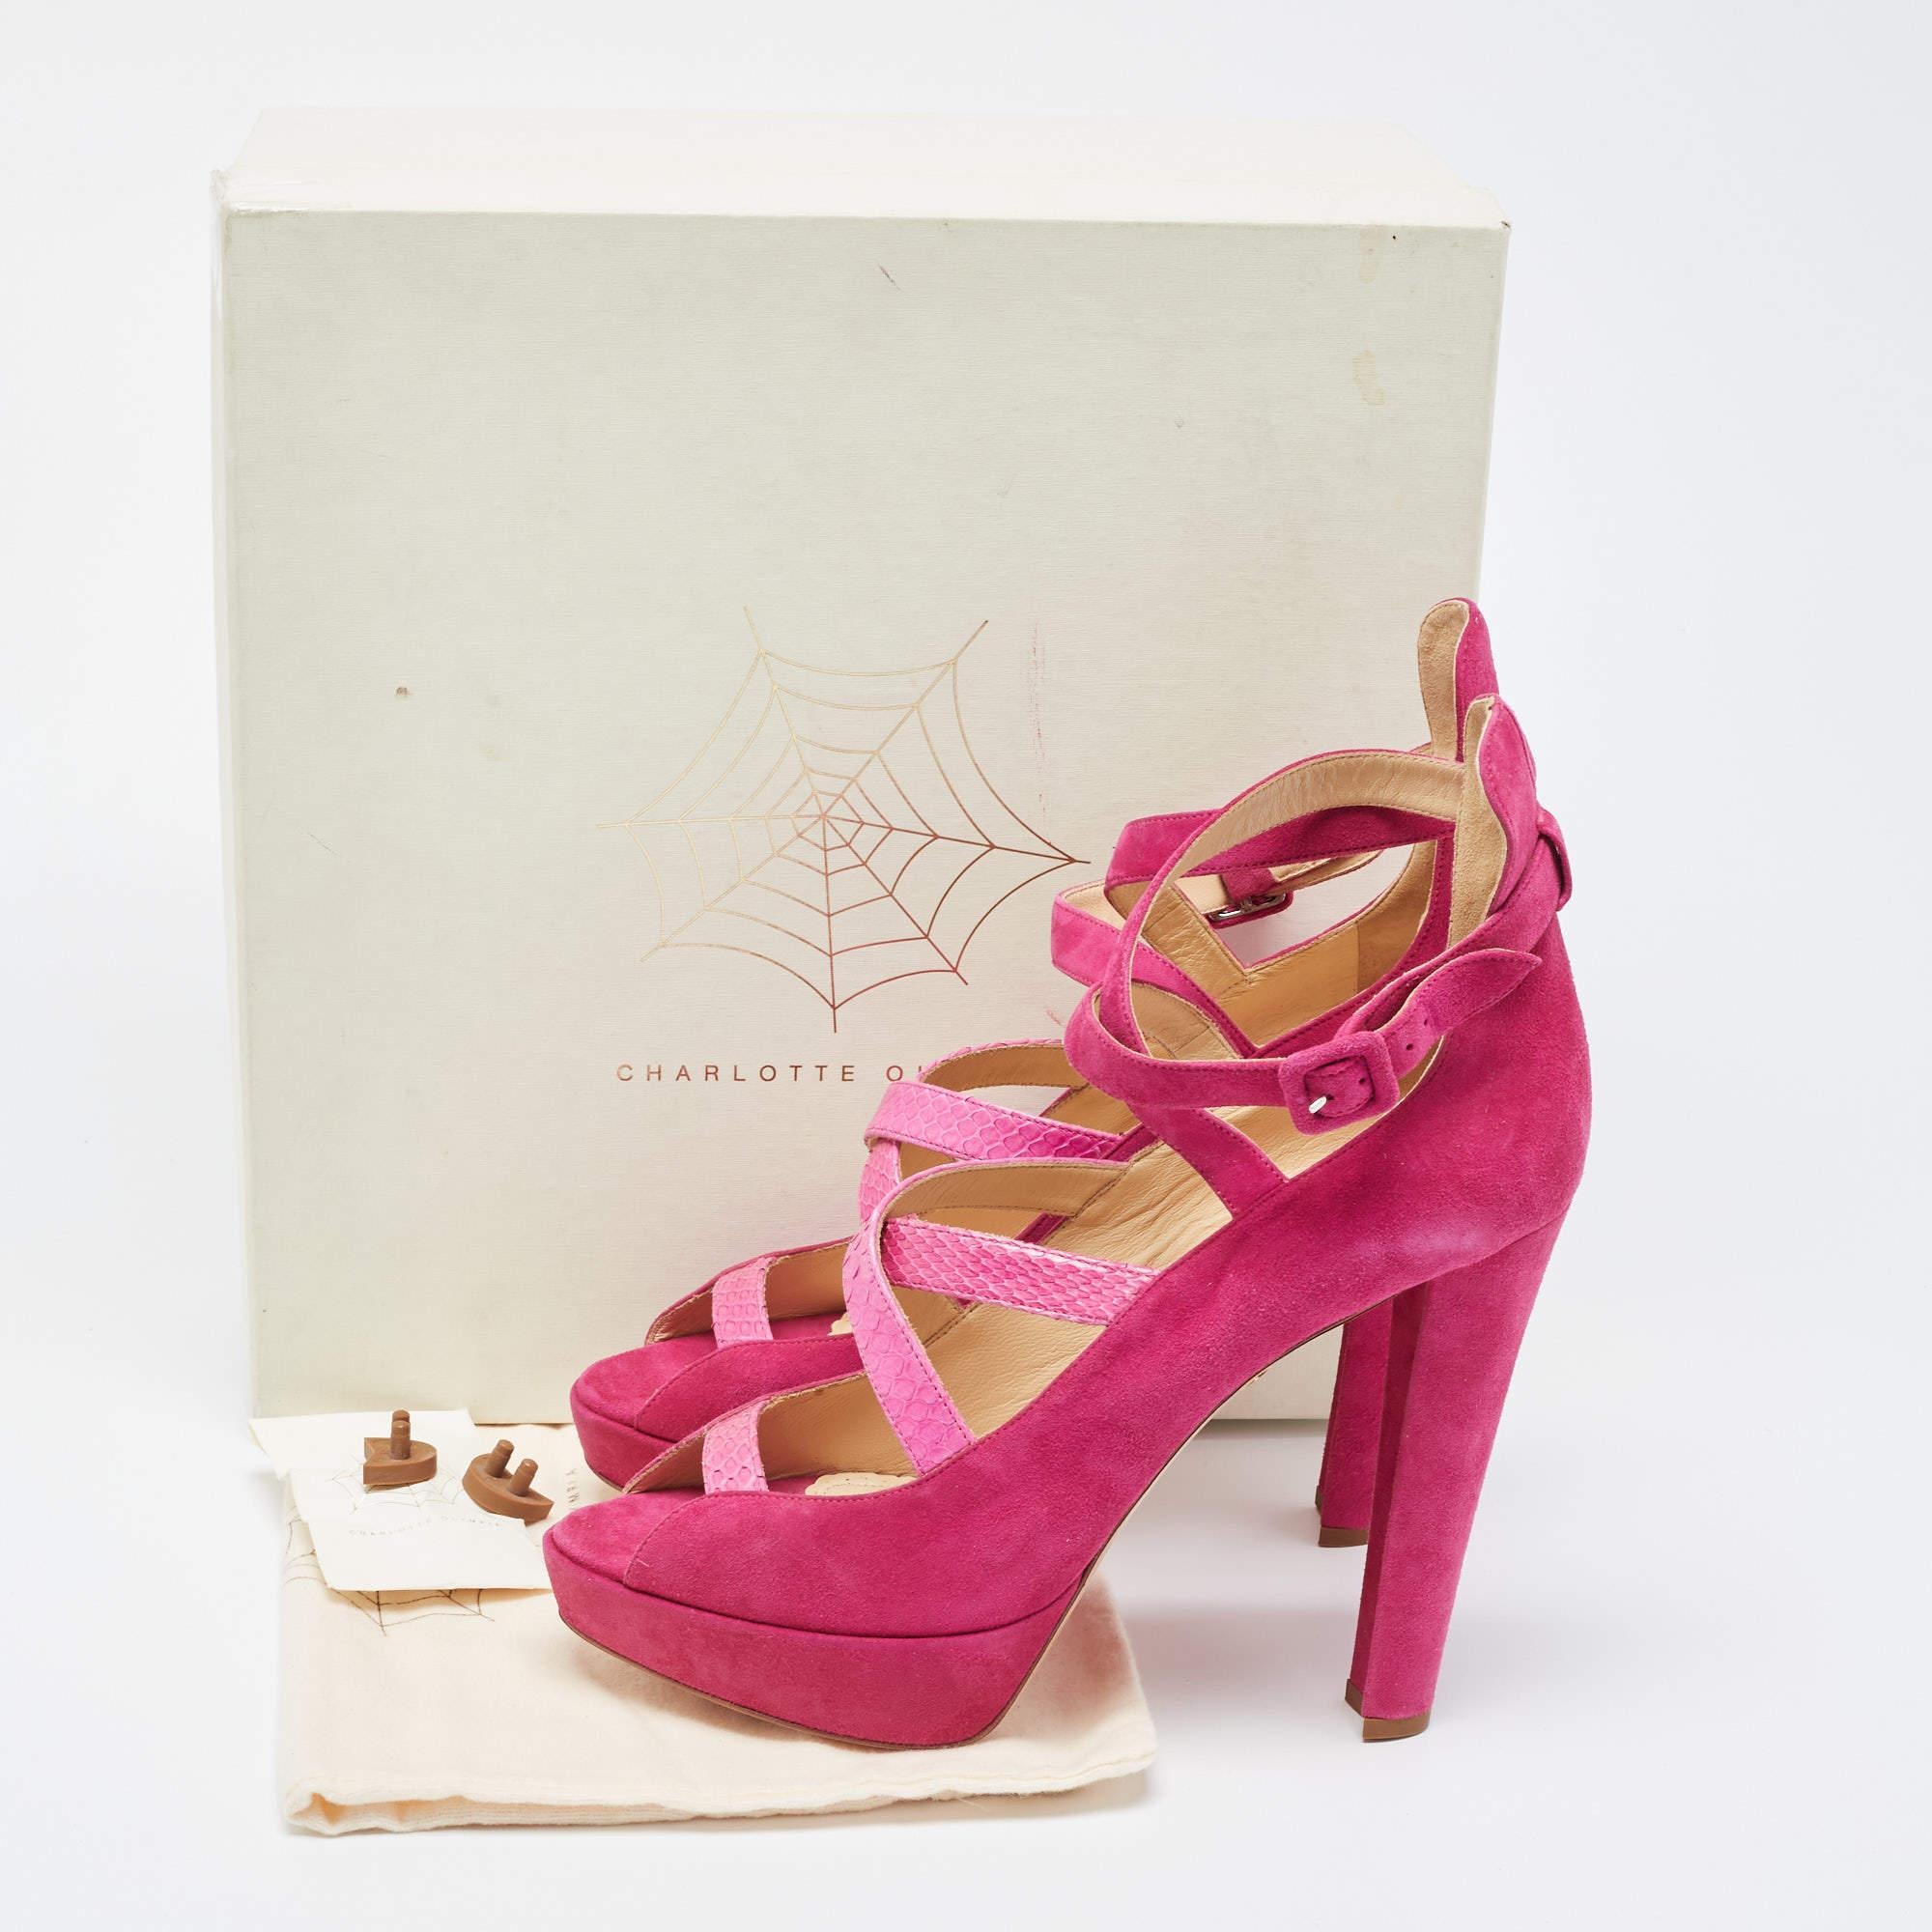 Charlotte Olympia Pink Suede and Python Platform Ankle Strap Pumps Size 41 4